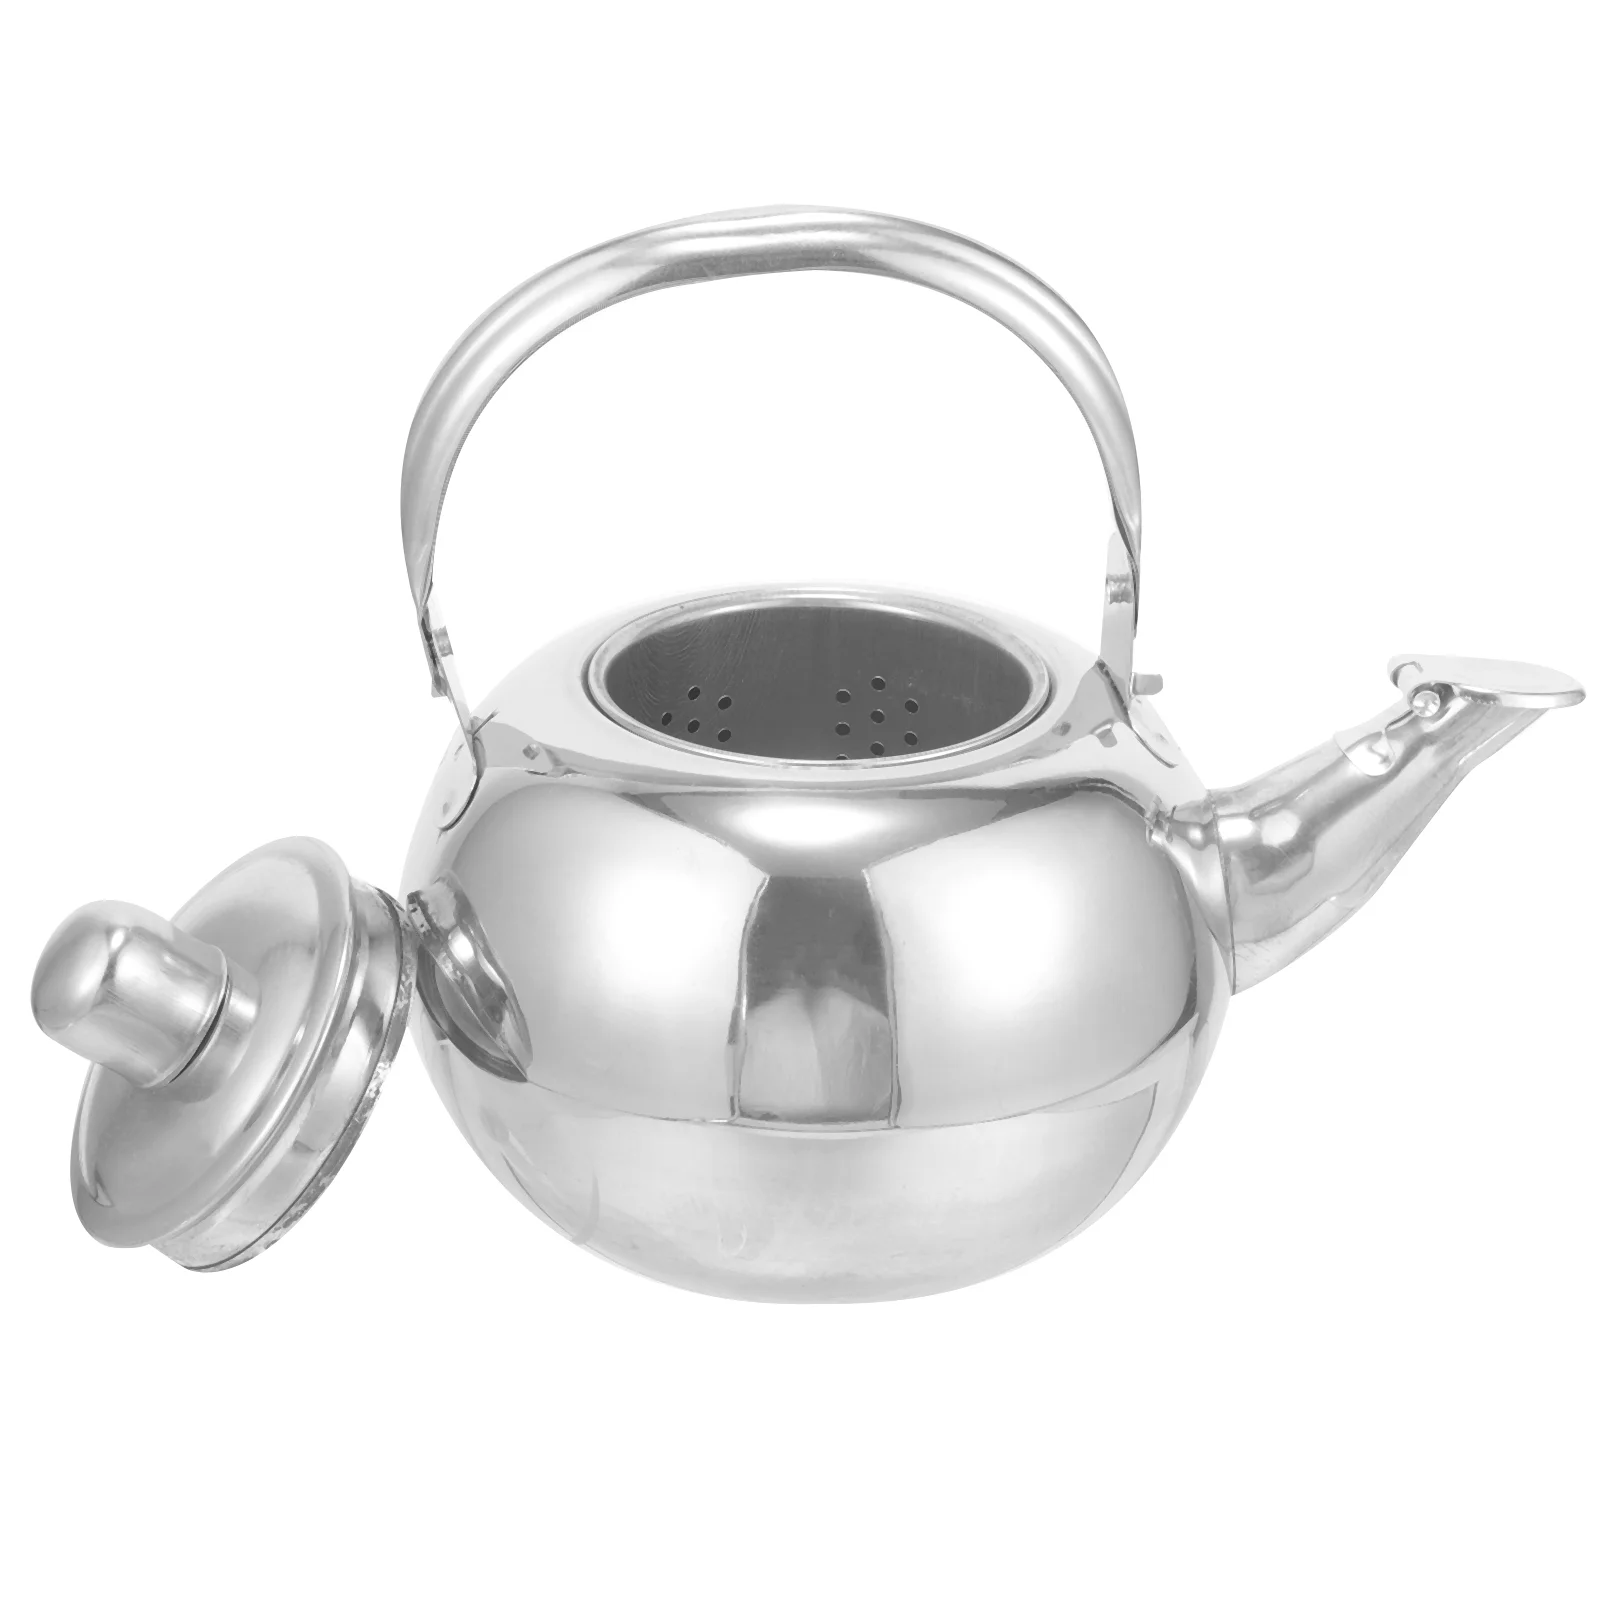 

Kettle Stainless Steel Teapot Stove Top Kettles Home Stovetop Travel Metal Office